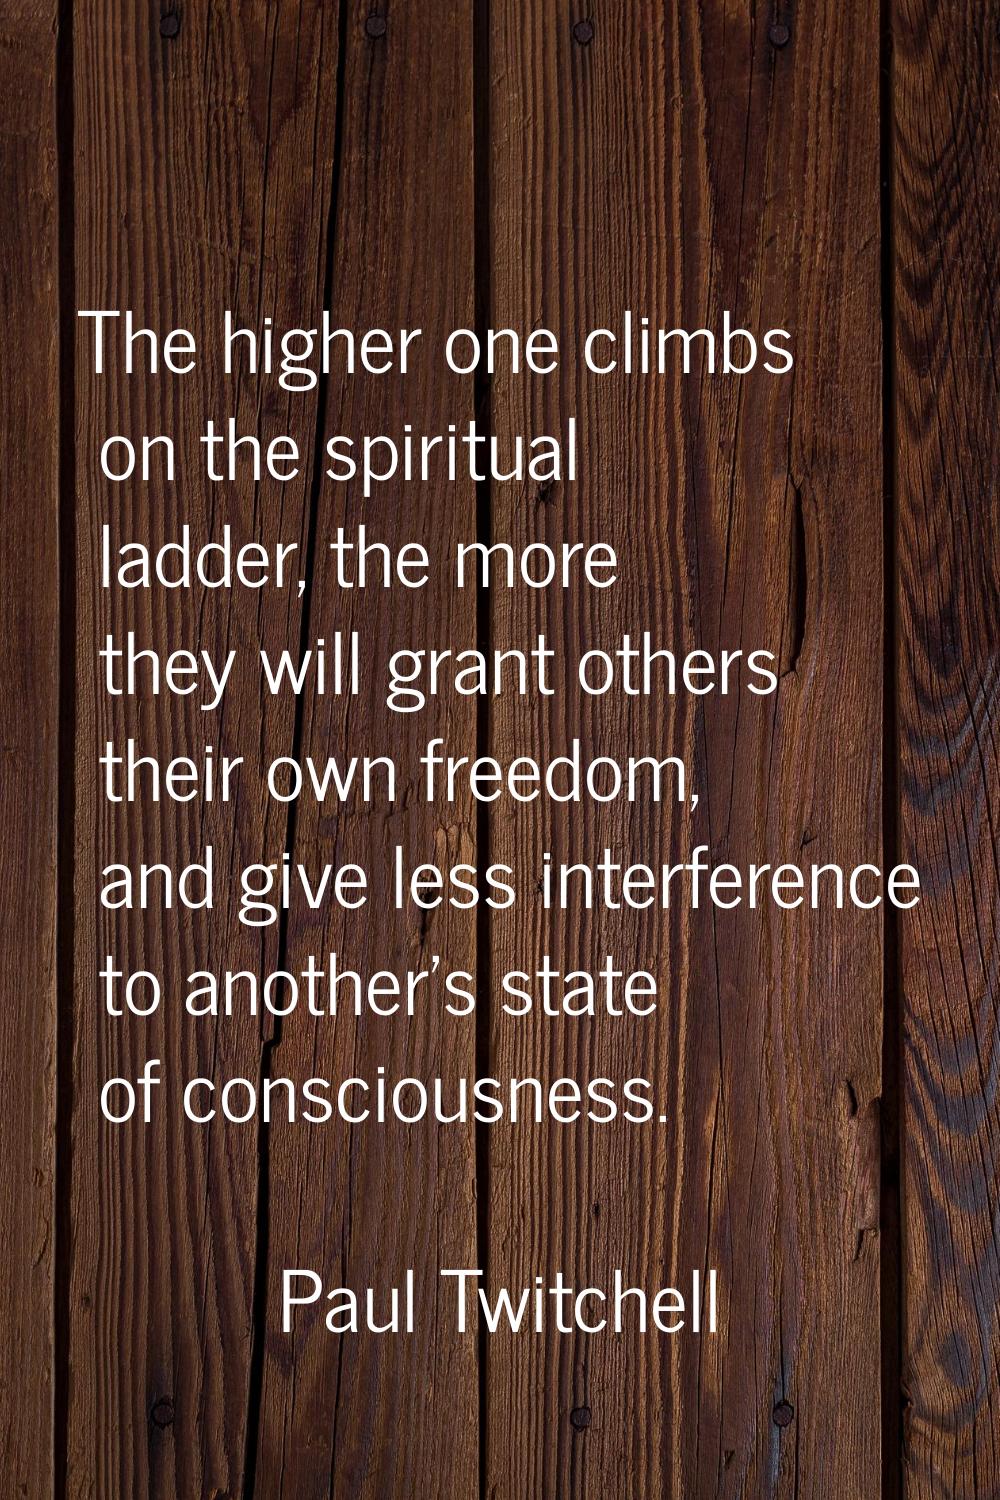 The higher one climbs on the spiritual ladder, the more they will grant others their own freedom, a